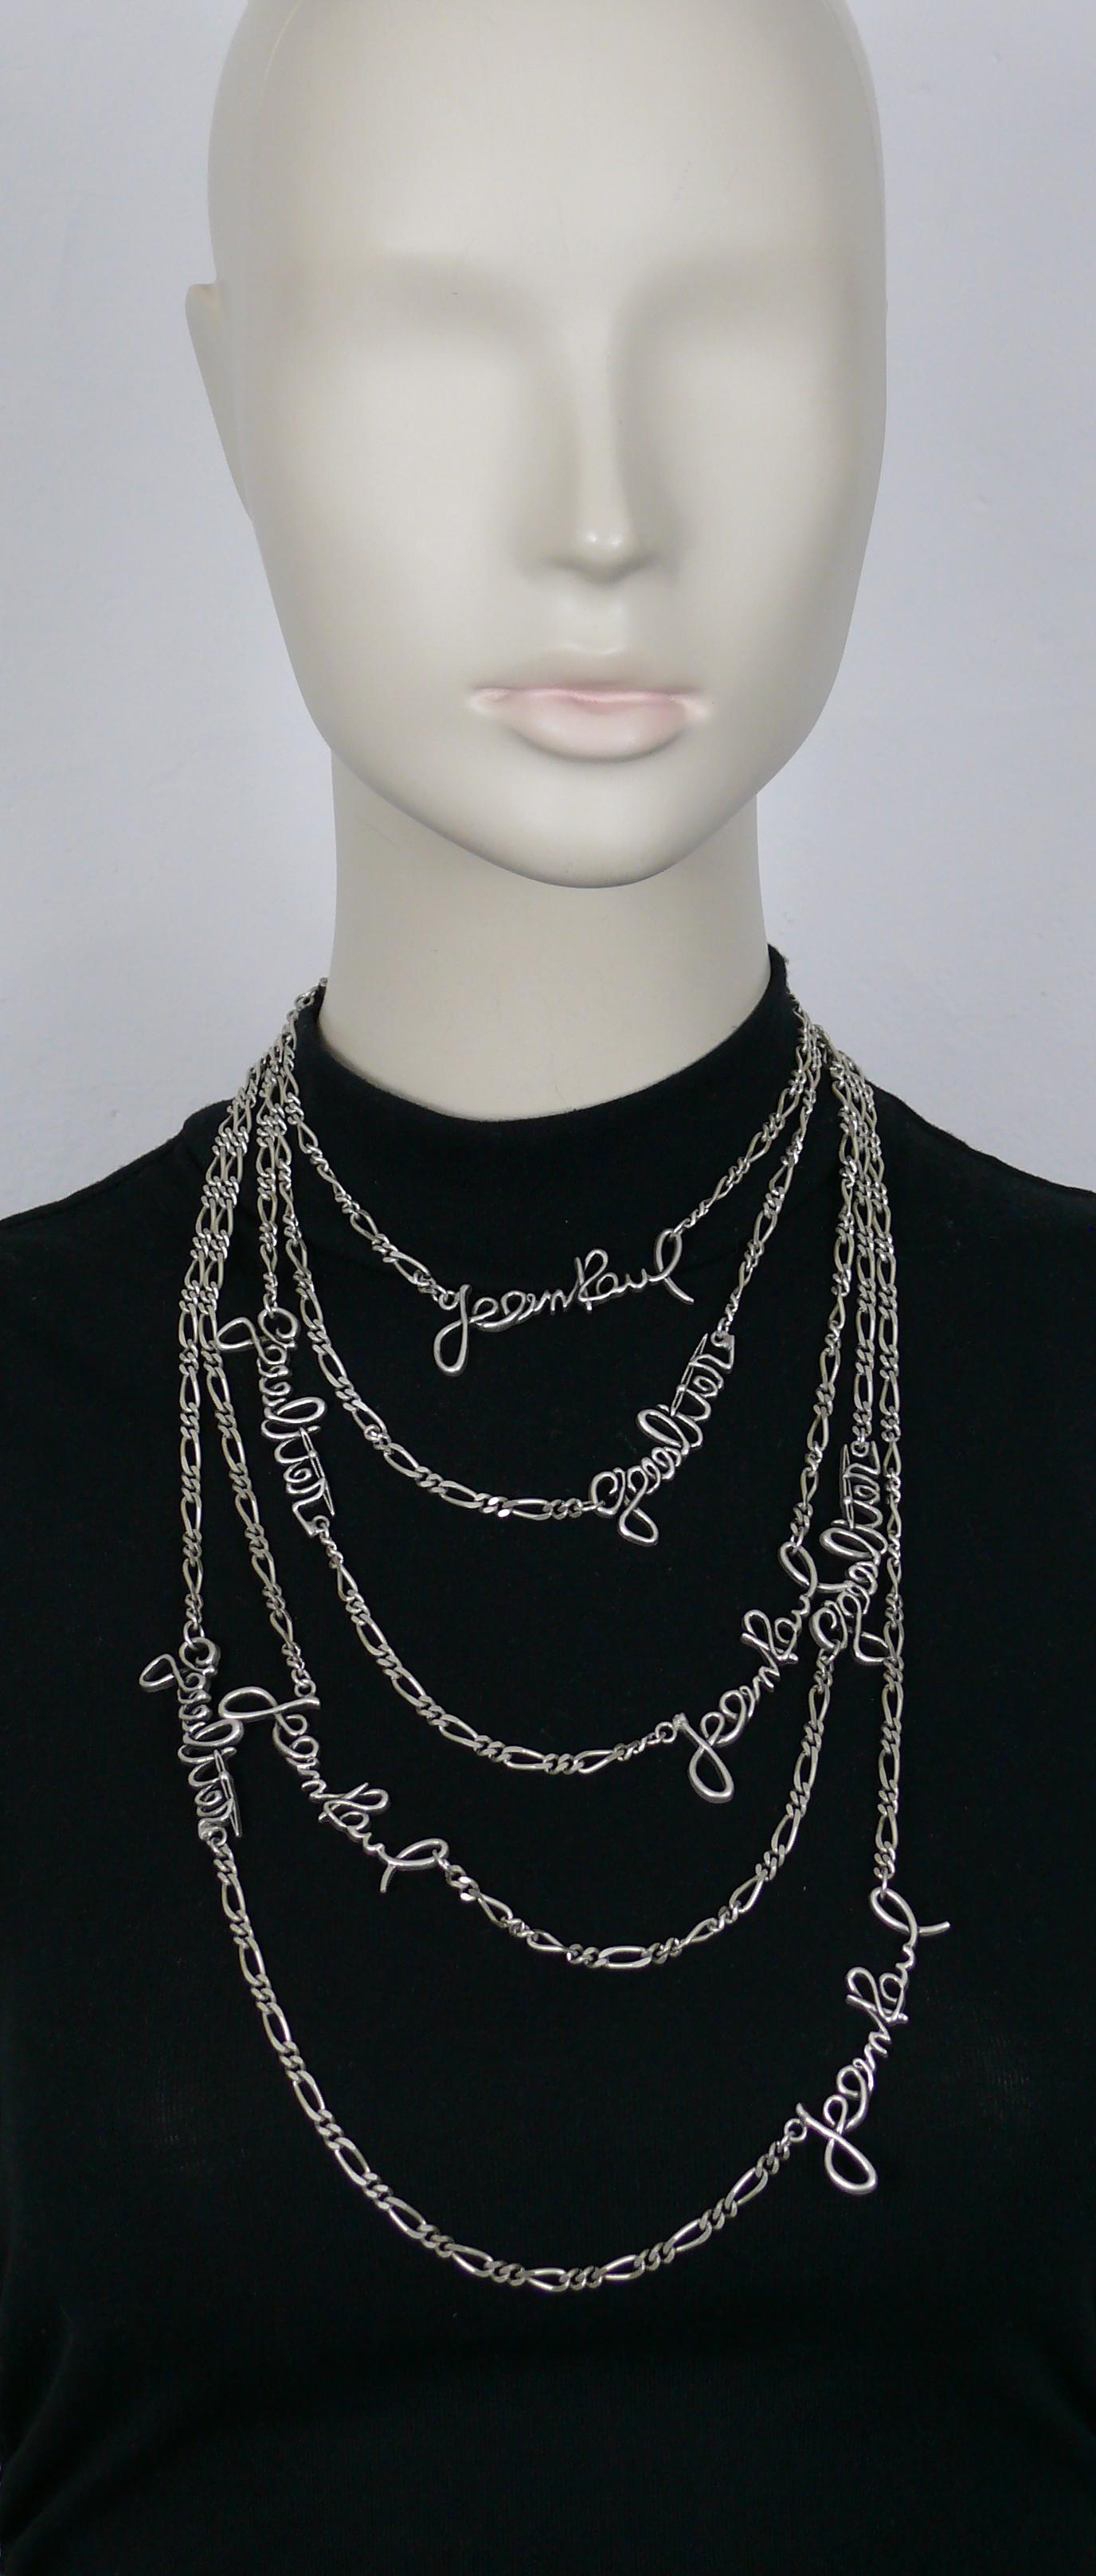 JEAN PAUL GAULTIER antiqued silver tone five strand chain necklace featuring JEAN PAUL GAULTIER cursive signatures.

Lobster clasp closure.
Adjustable length.

Unmarked.

Indicative measurements : adjustable length from approx. 33 cm (12.99 inches)